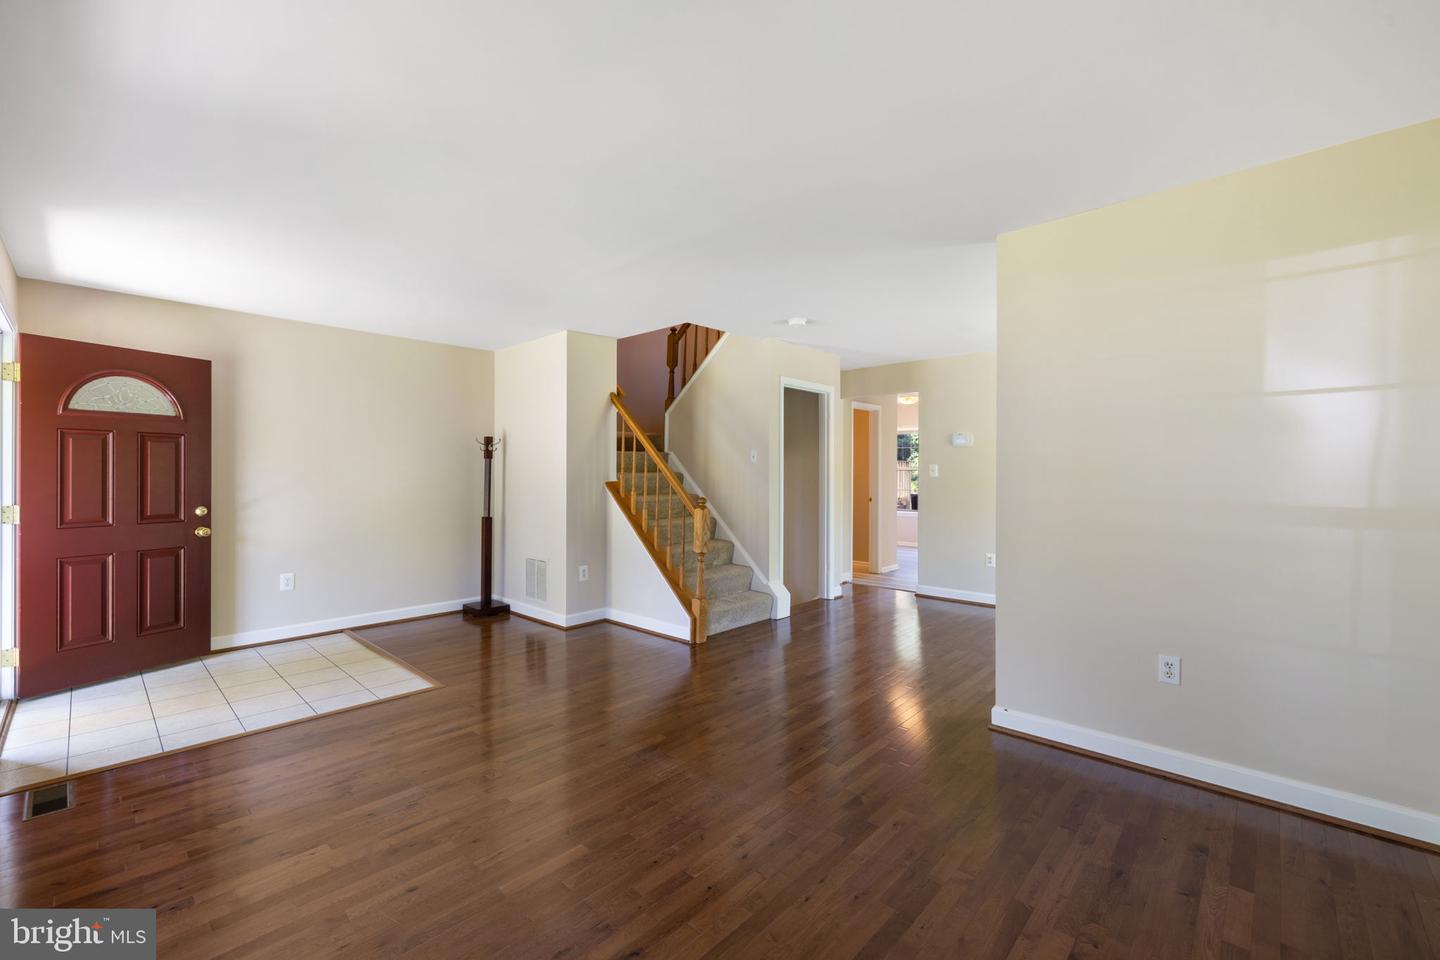 Photo 9 of 57 of 6934 Hovingham Ct townhome